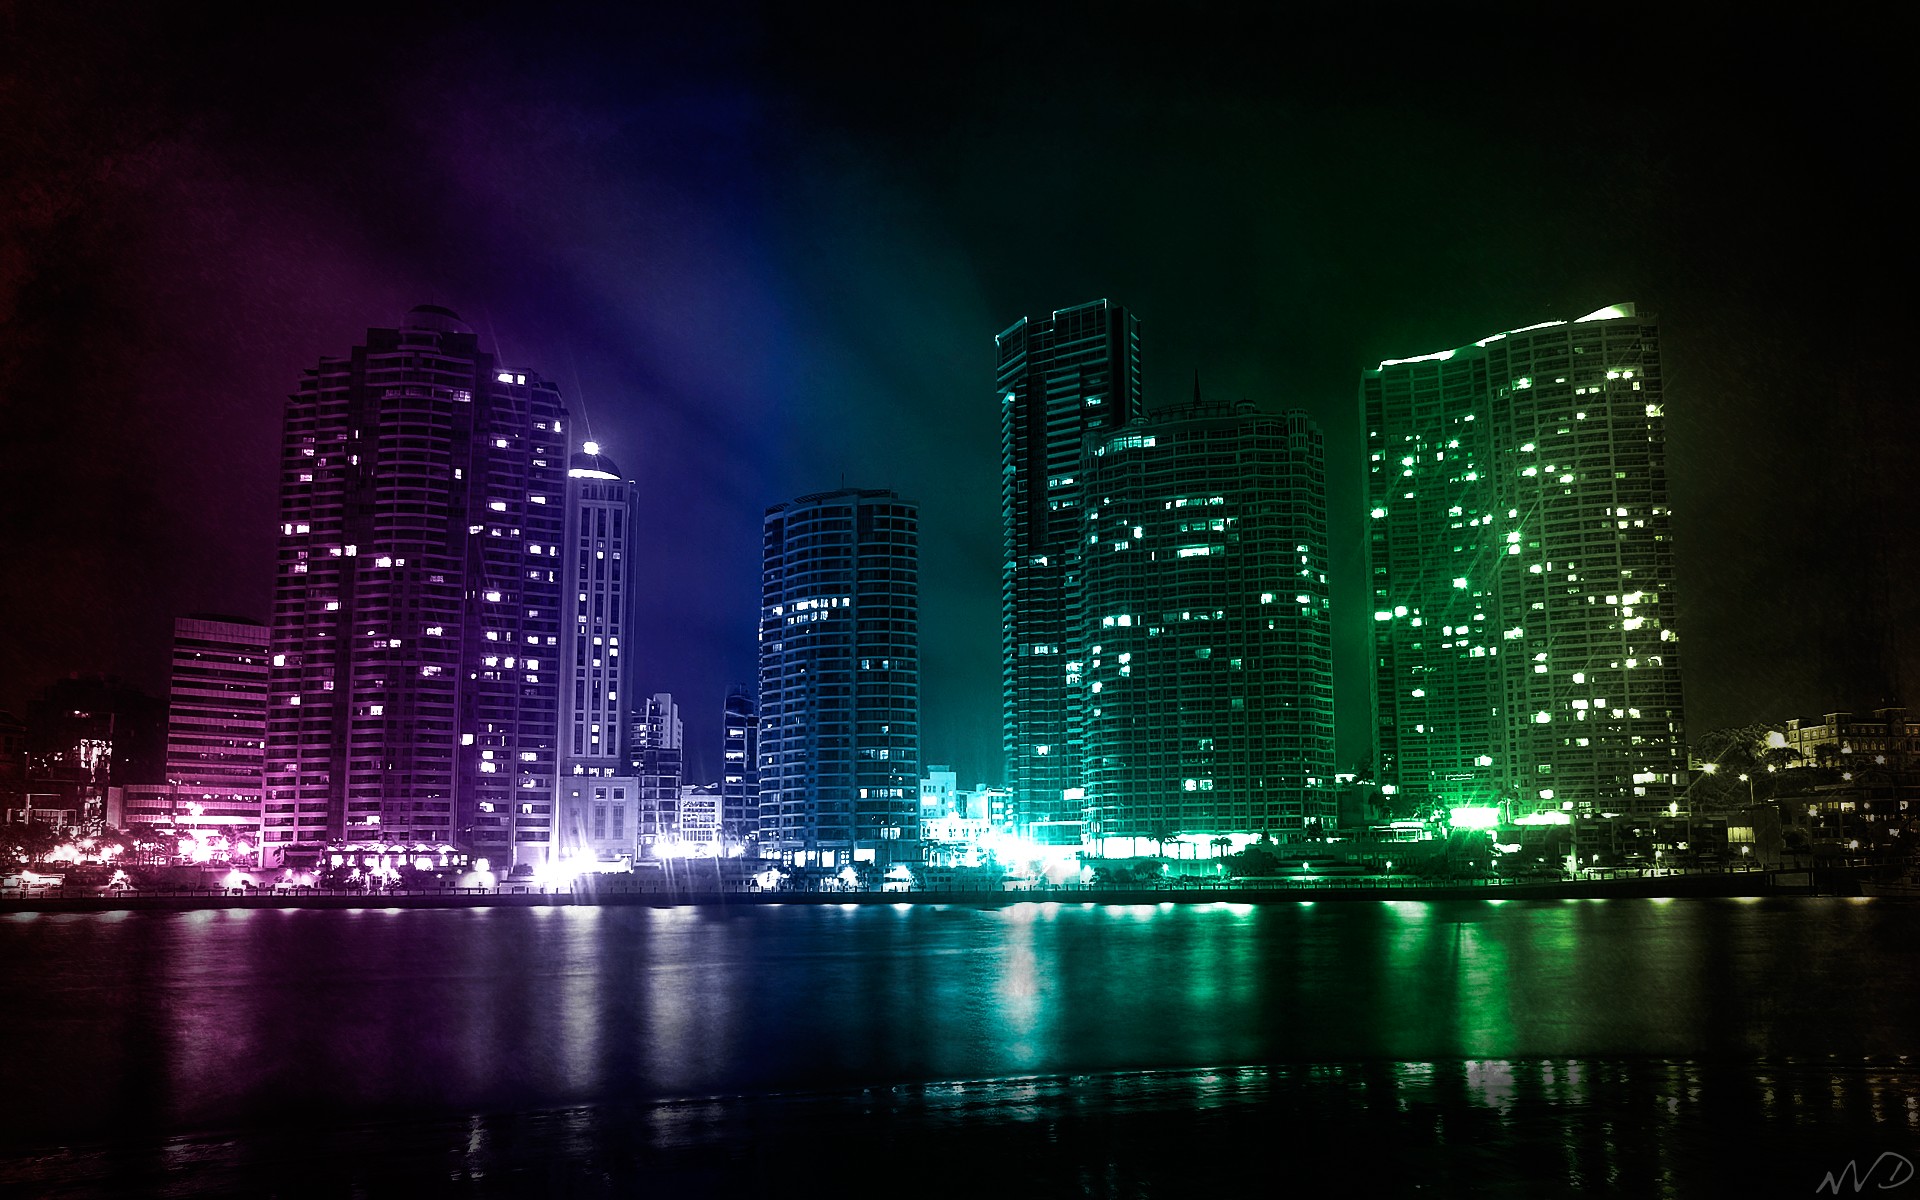 https://static.blog4ever.com/2013/08/747410/cool-wallpapers-lights-city-oucoqmar.jpg